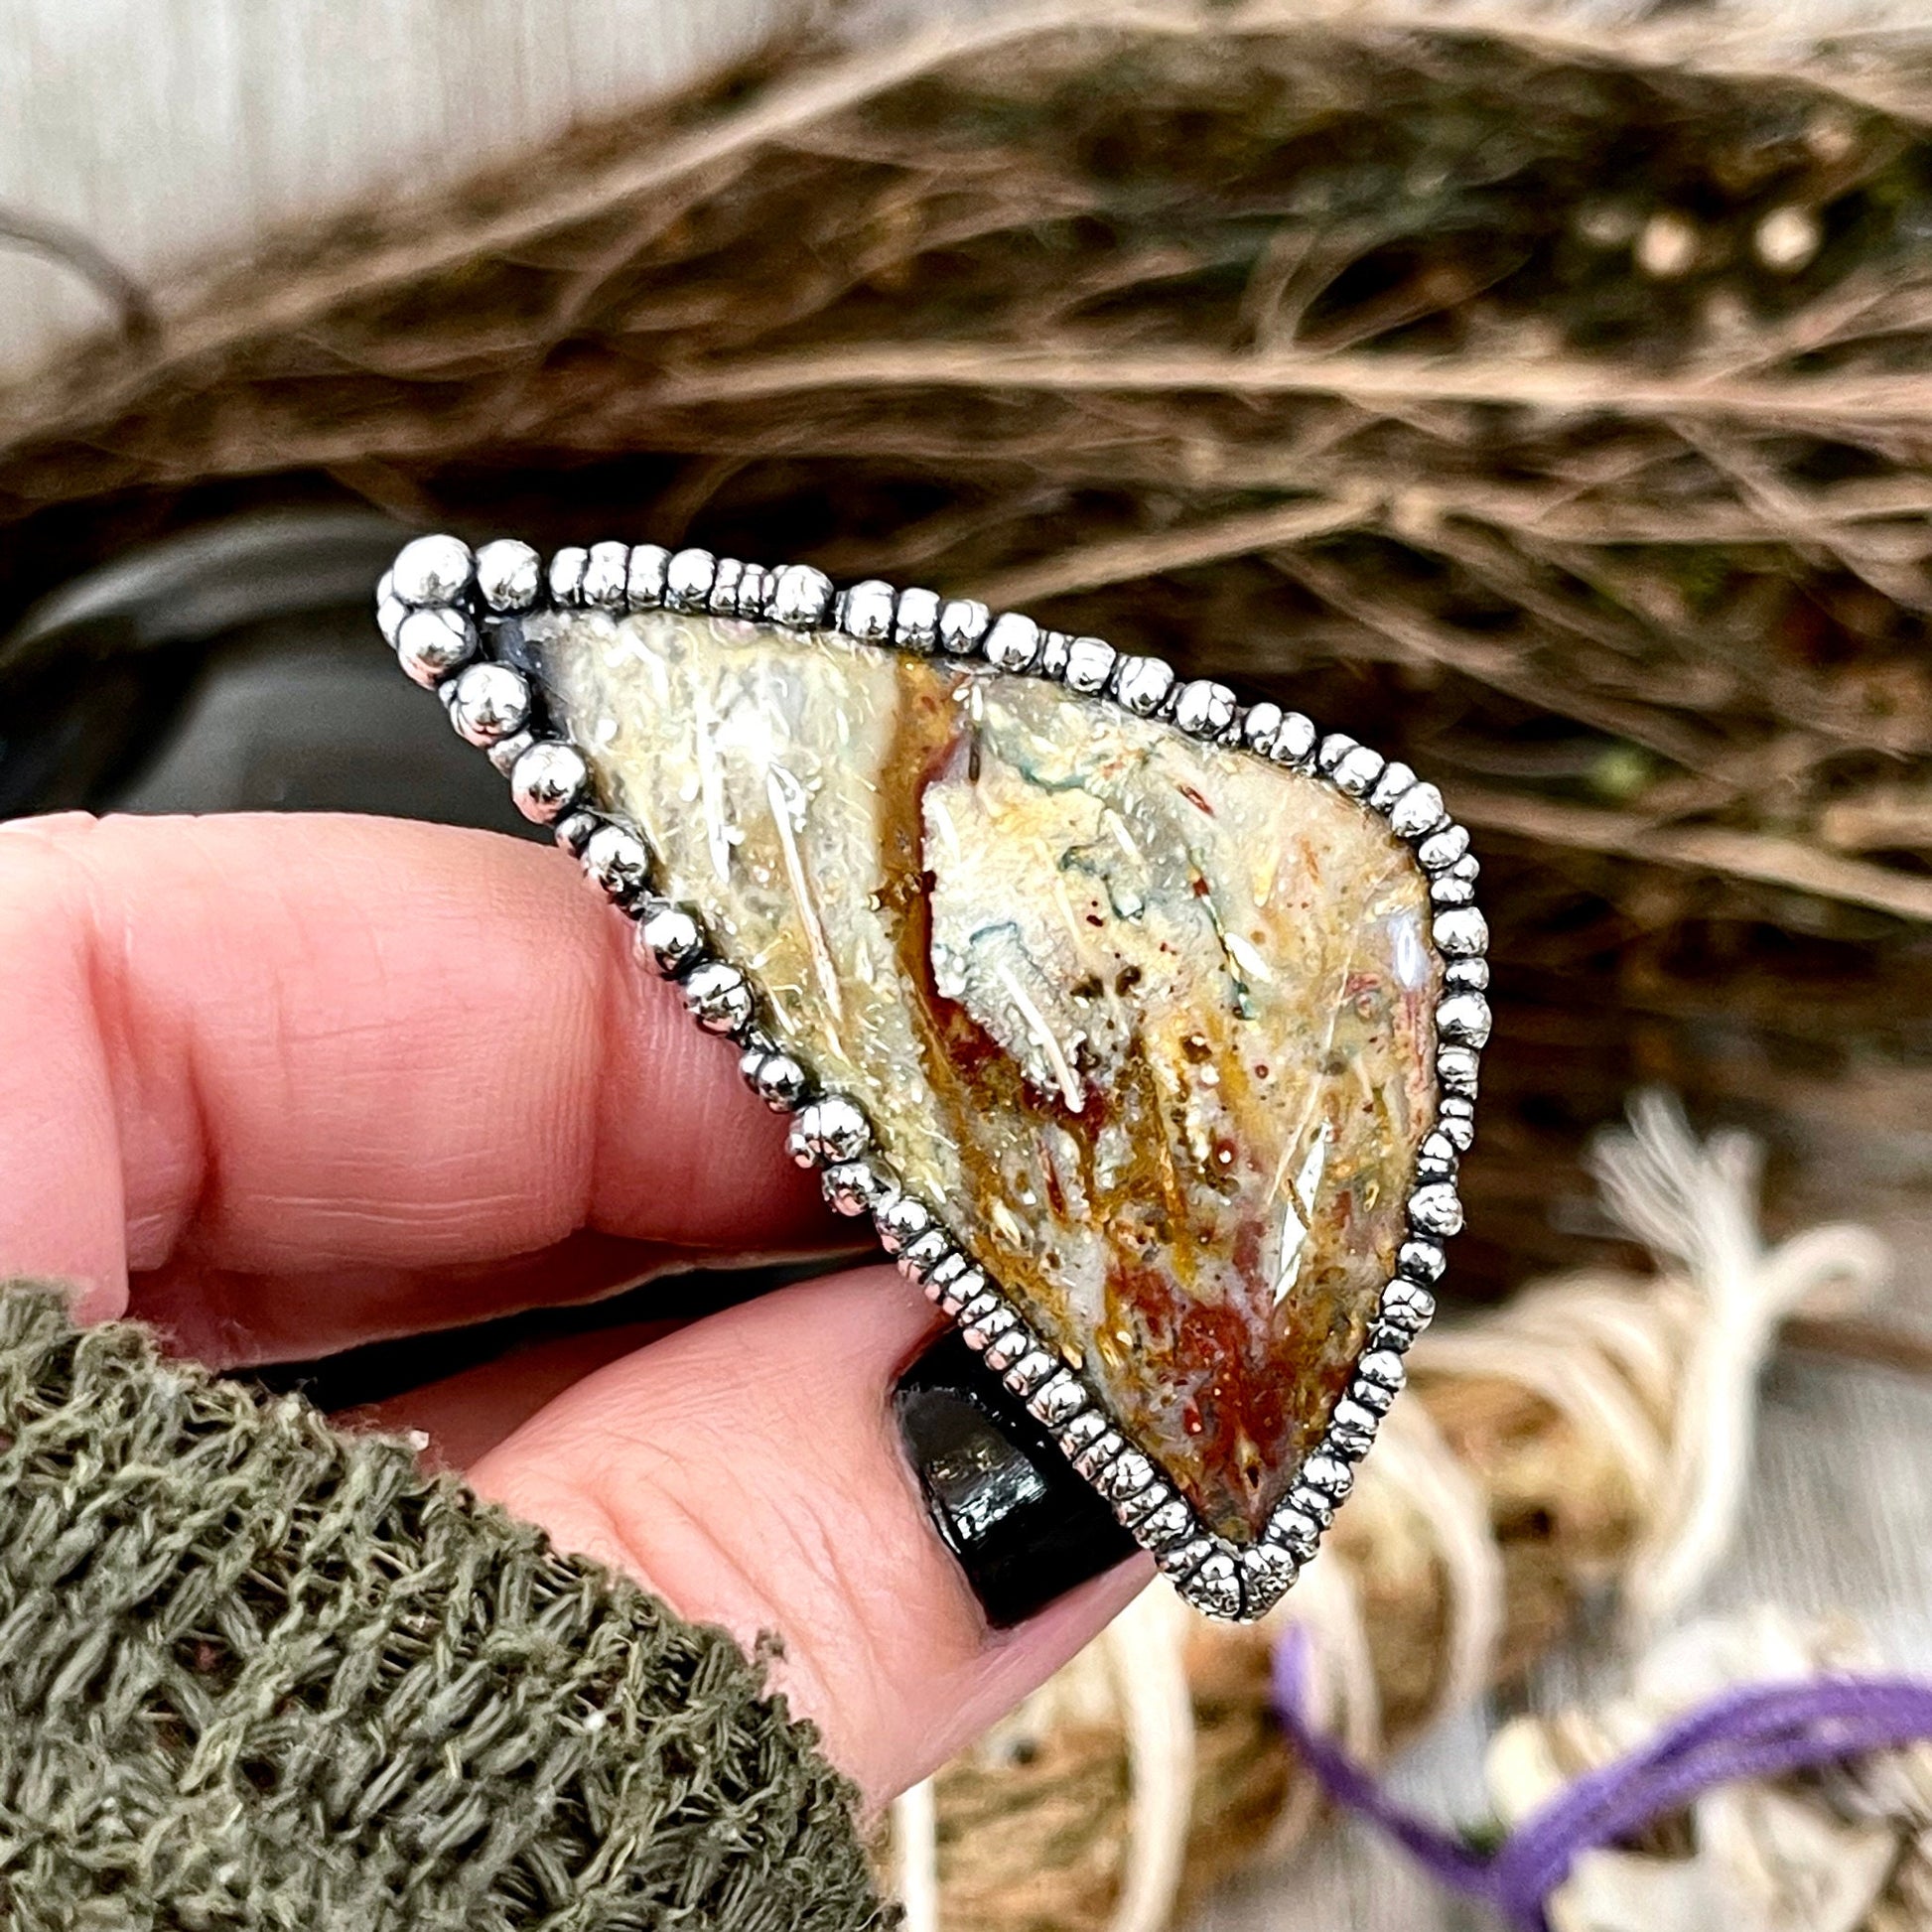 Big Bold Jewelry, Big Crystal Ring, Big Silver Ring, Big Stone Ring, Etsy ID: 1400297634, Fossilized Palm Root, FOXLARK- RINGS, Jewelry, Large Boho Ring, Large Crystal Ring, Large Stone Ring, Natural stone ring, Rings, silver crystal ring, Silver Stone Je